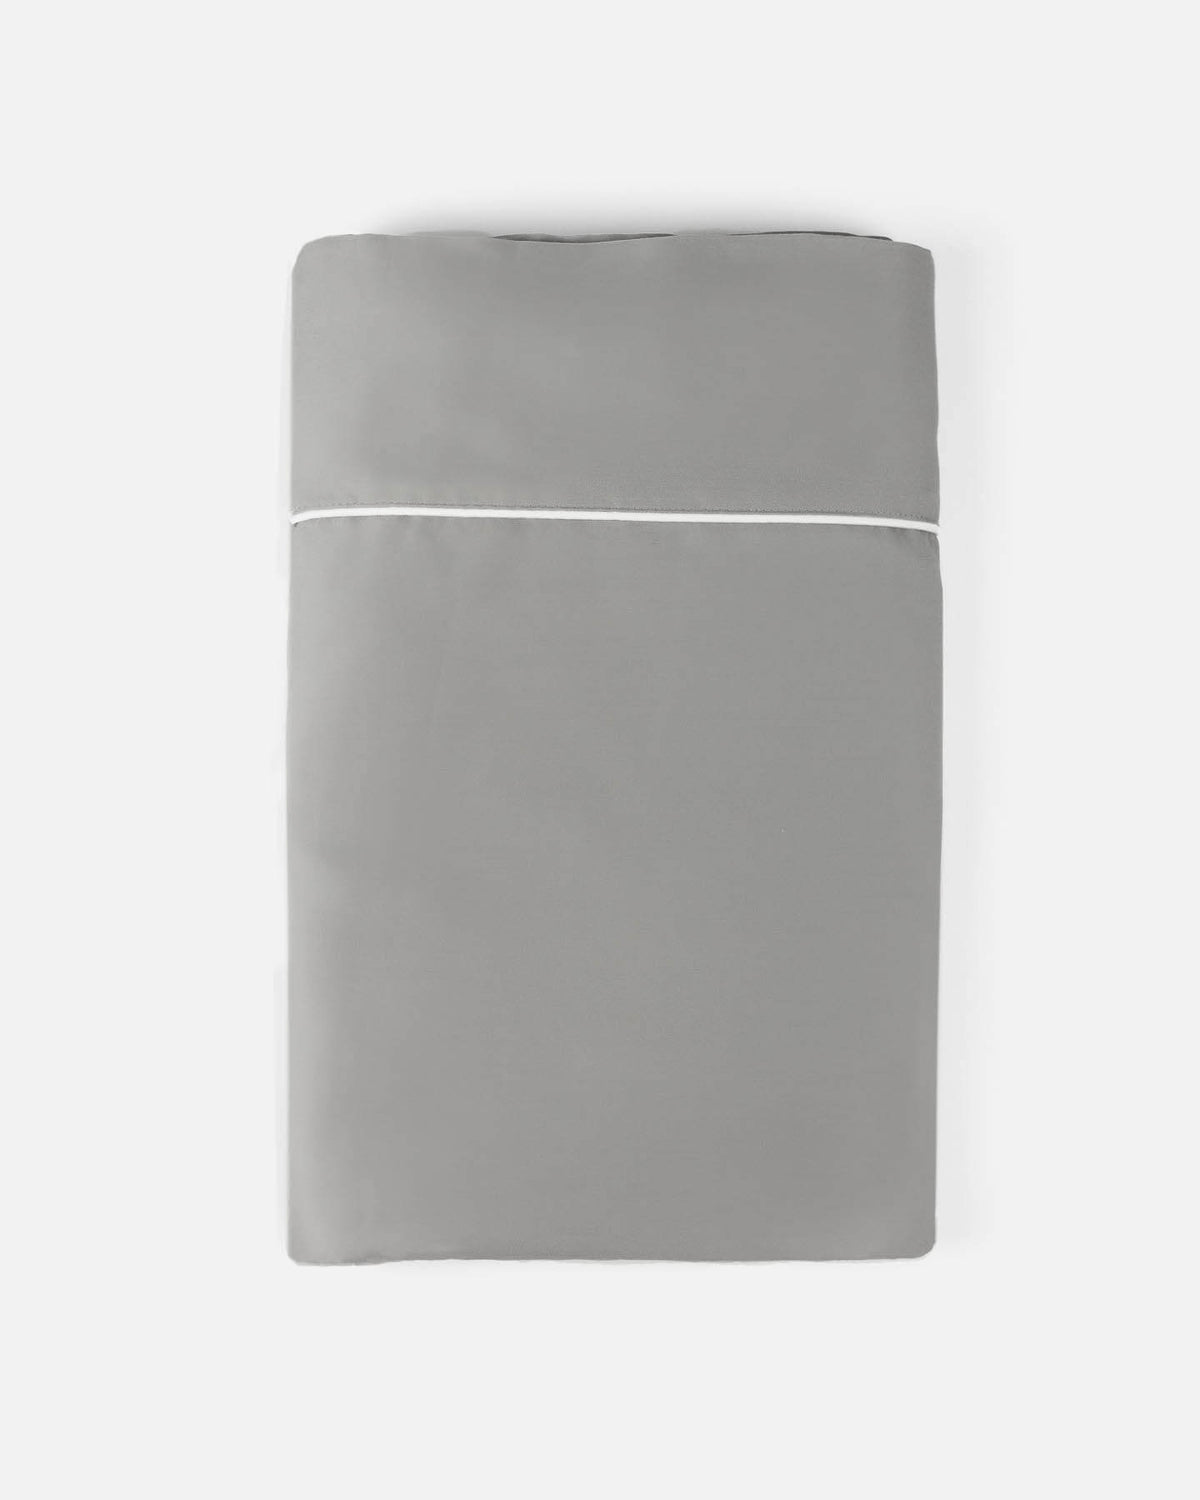 ava and ava ph organic bamboo lyocell flat sheet neutral monochrome gray gwith white contrast piping at the top hem